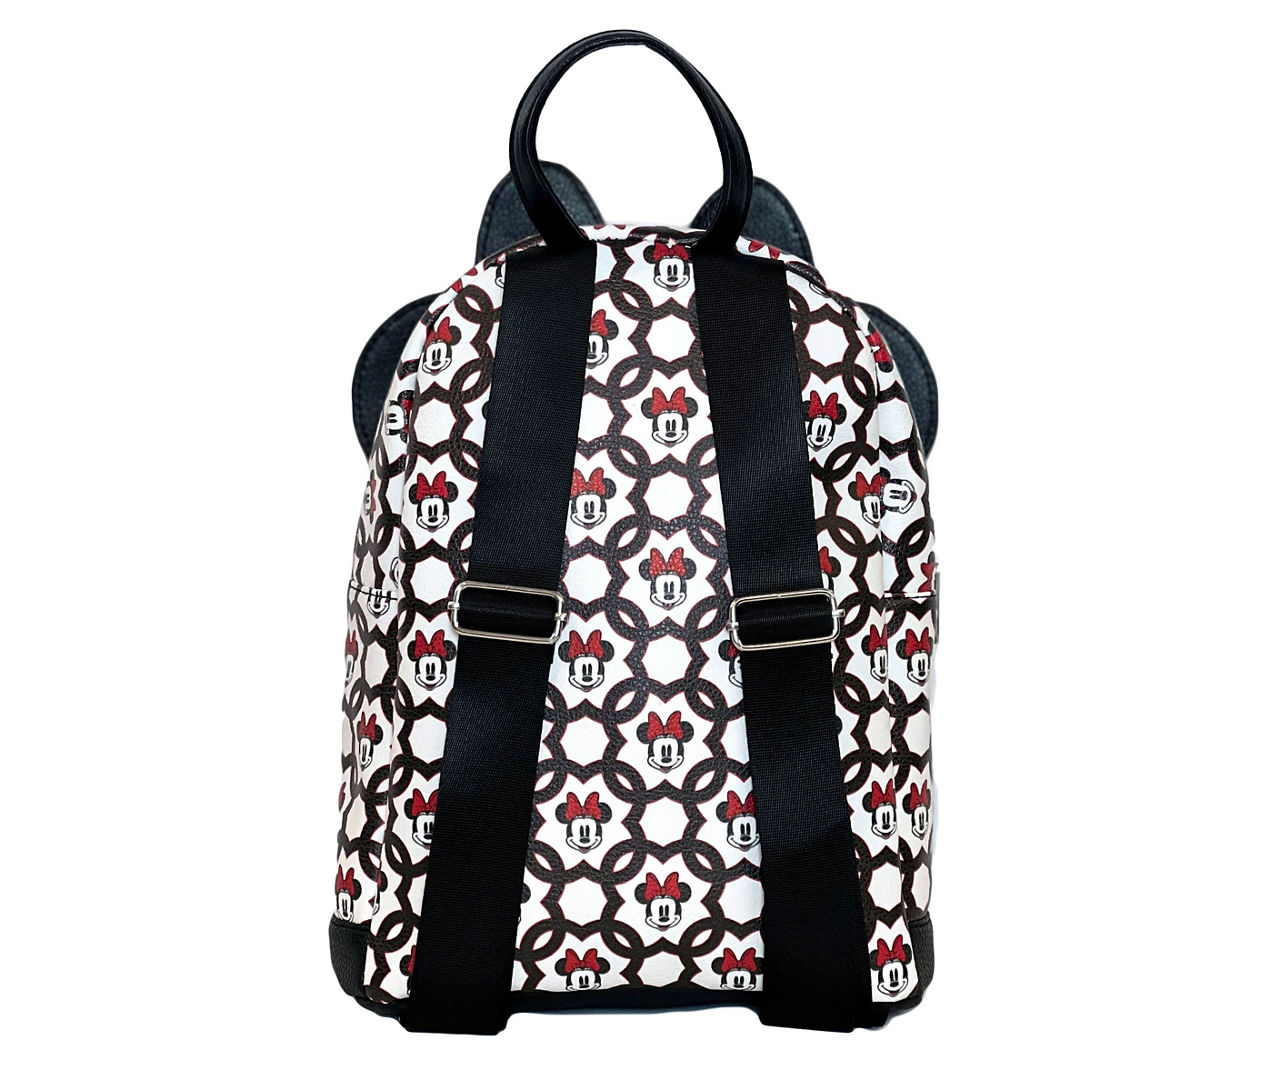 Black Faux Leather Backpack Featuring An All-Over Disneys Mickey Mouse  Pattern & Adjustable Straps